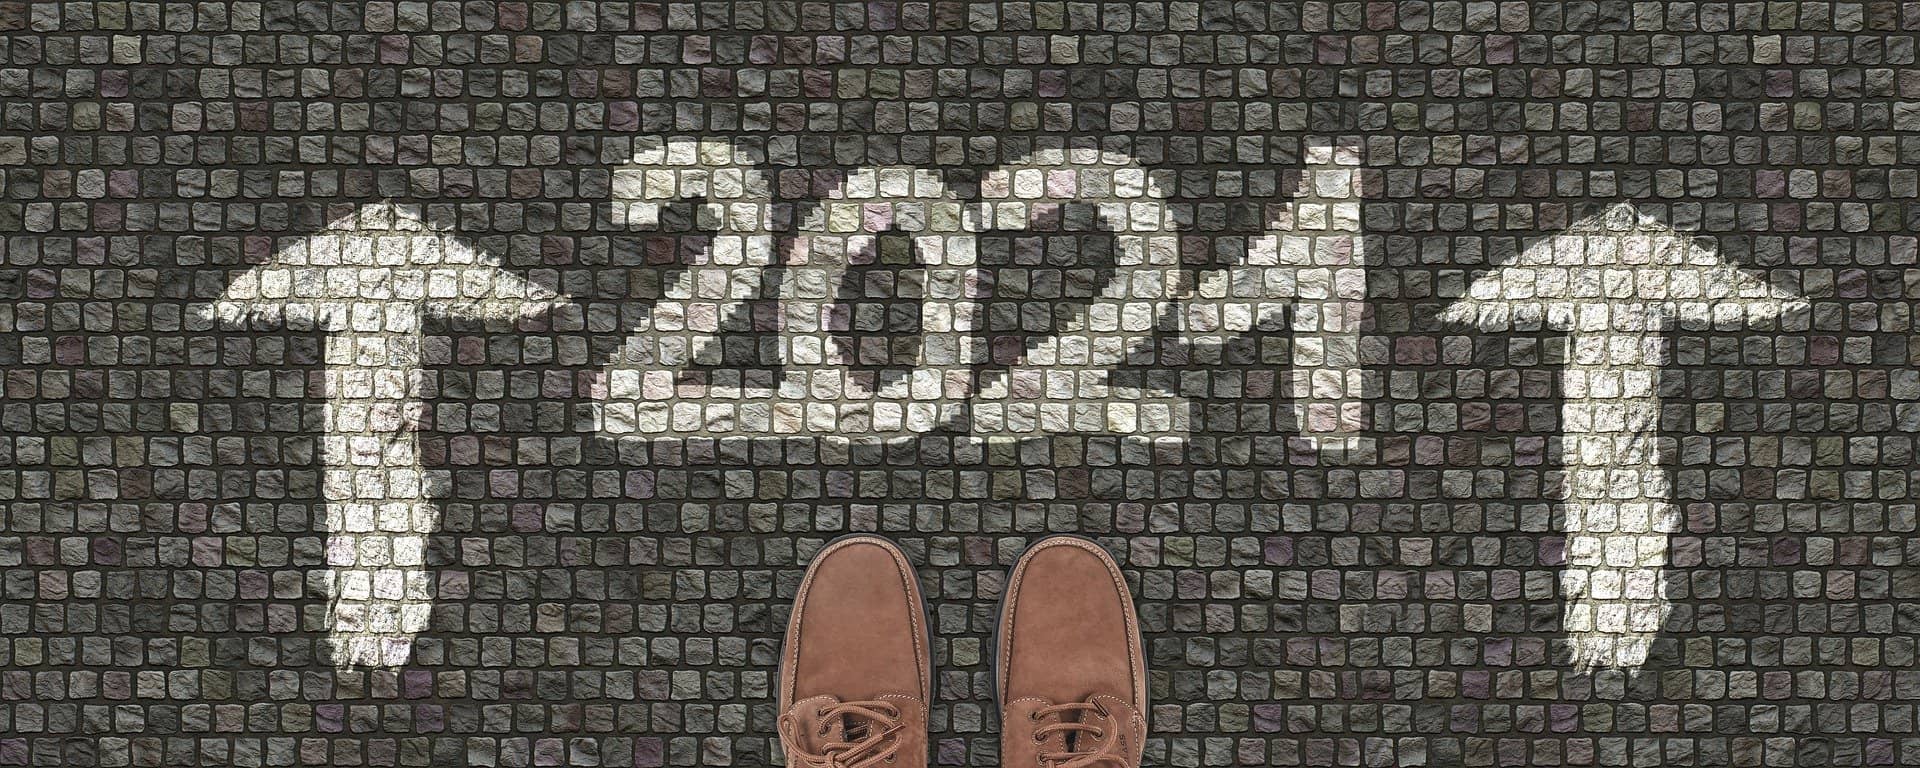 HAPPY NEW YEAR 2021! A LOOK OUT AND REVIEW 1